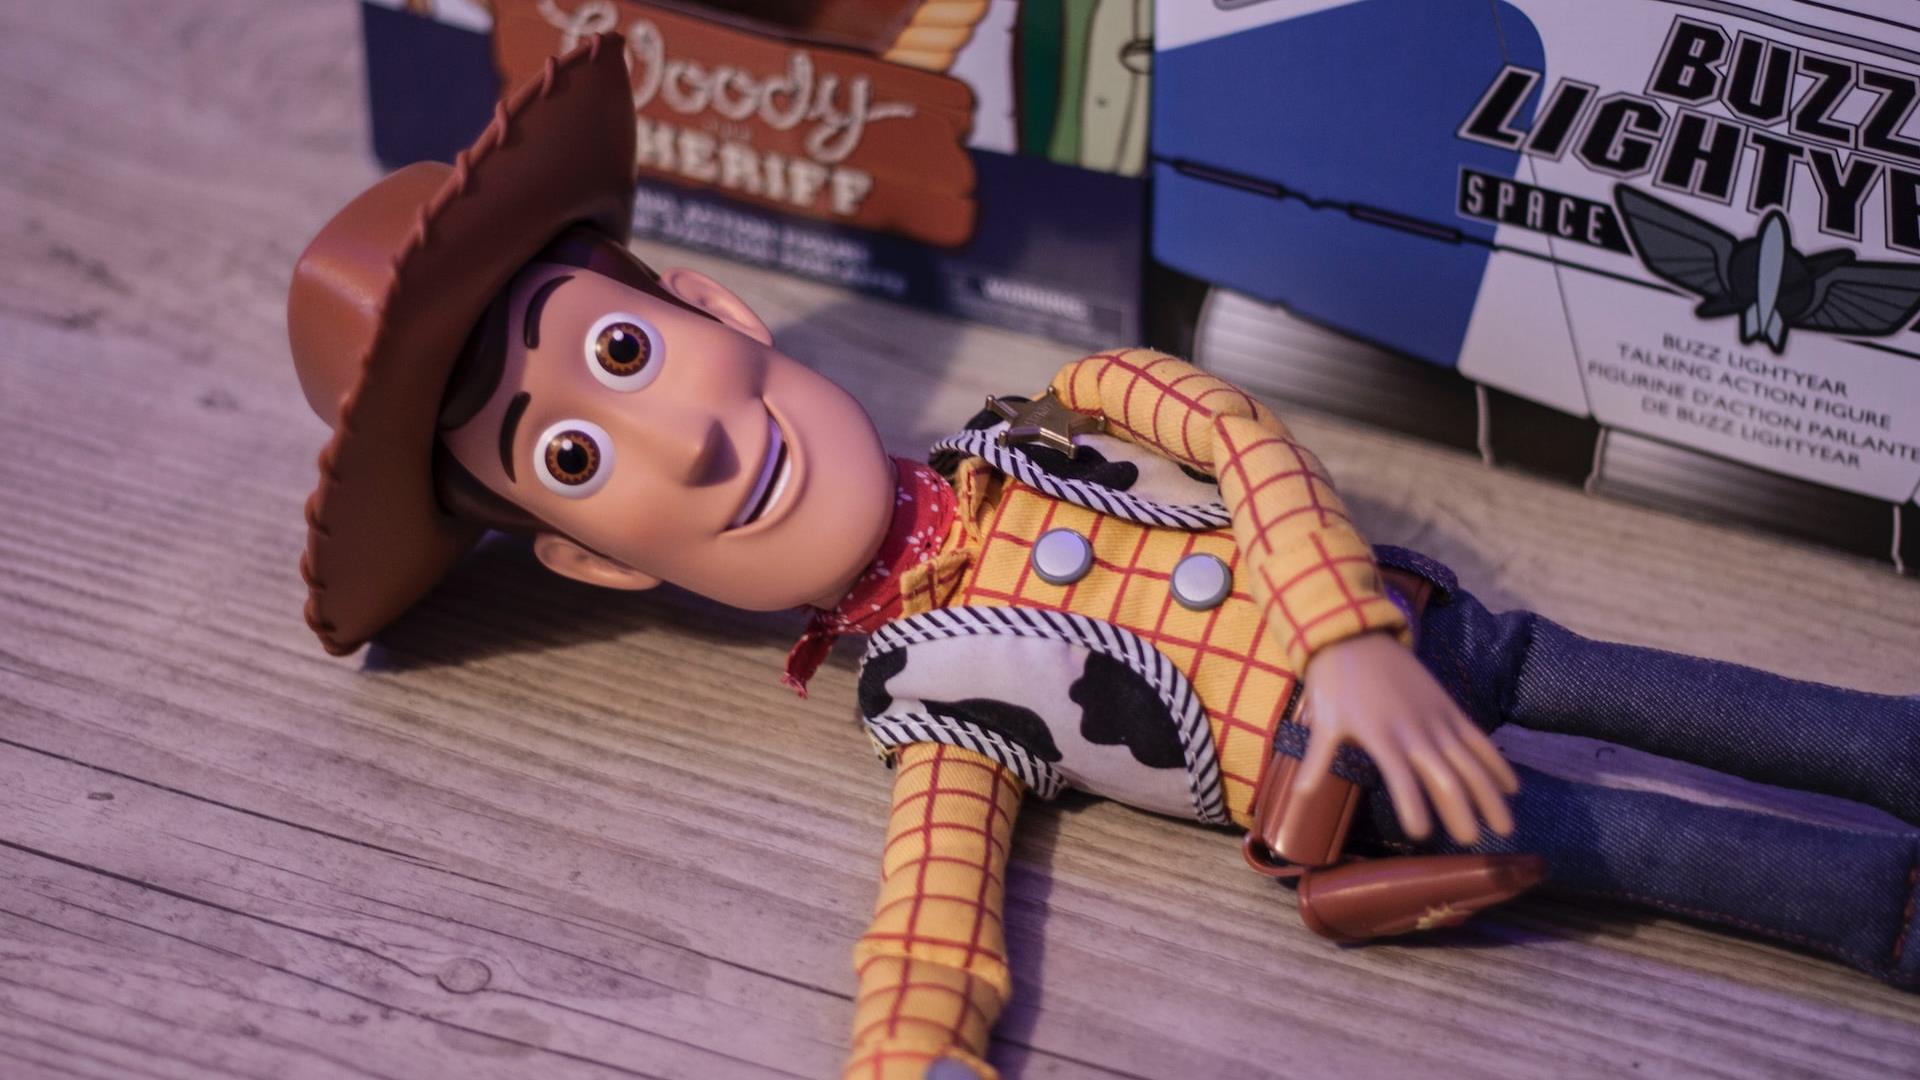 Toy Character from Toy Story